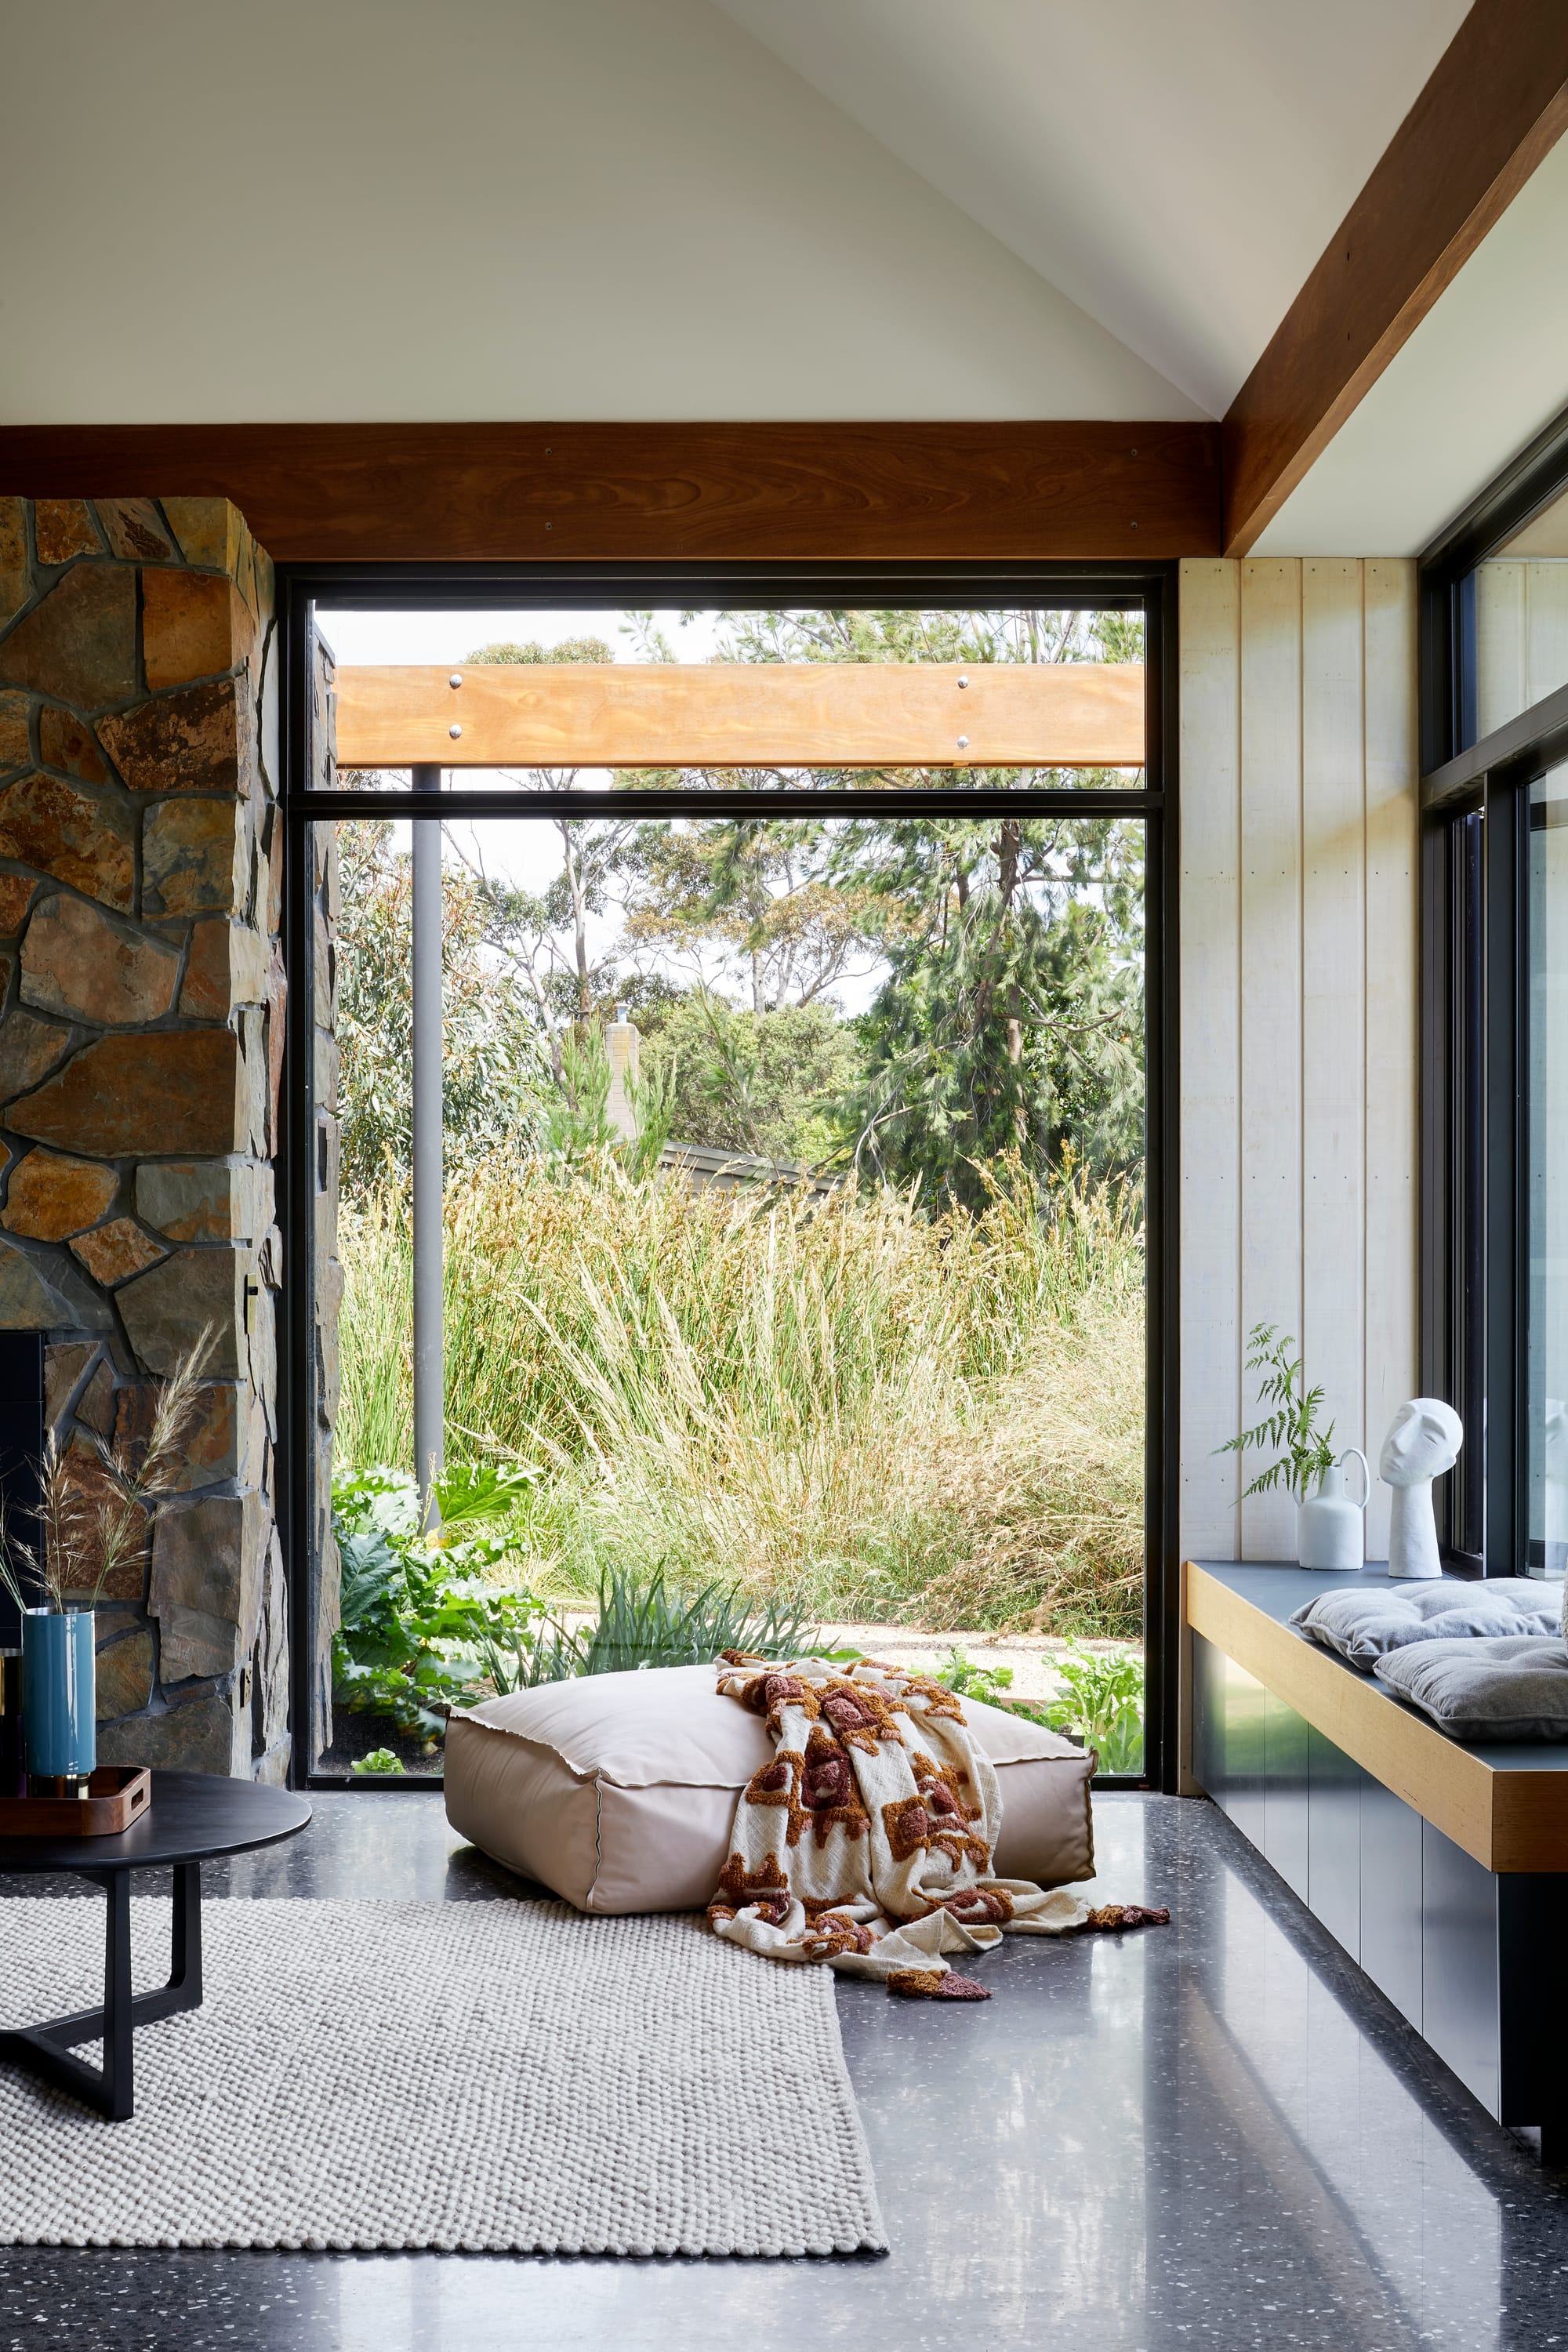 Mt Eliza House by BENT Architecture. Photography by Tatjana Plitt. Living space with floor-to-ceiling black framed windows overlooking garden. Polished concrete floors and cream ottoman on floor. Large stone fireplace to left of image.